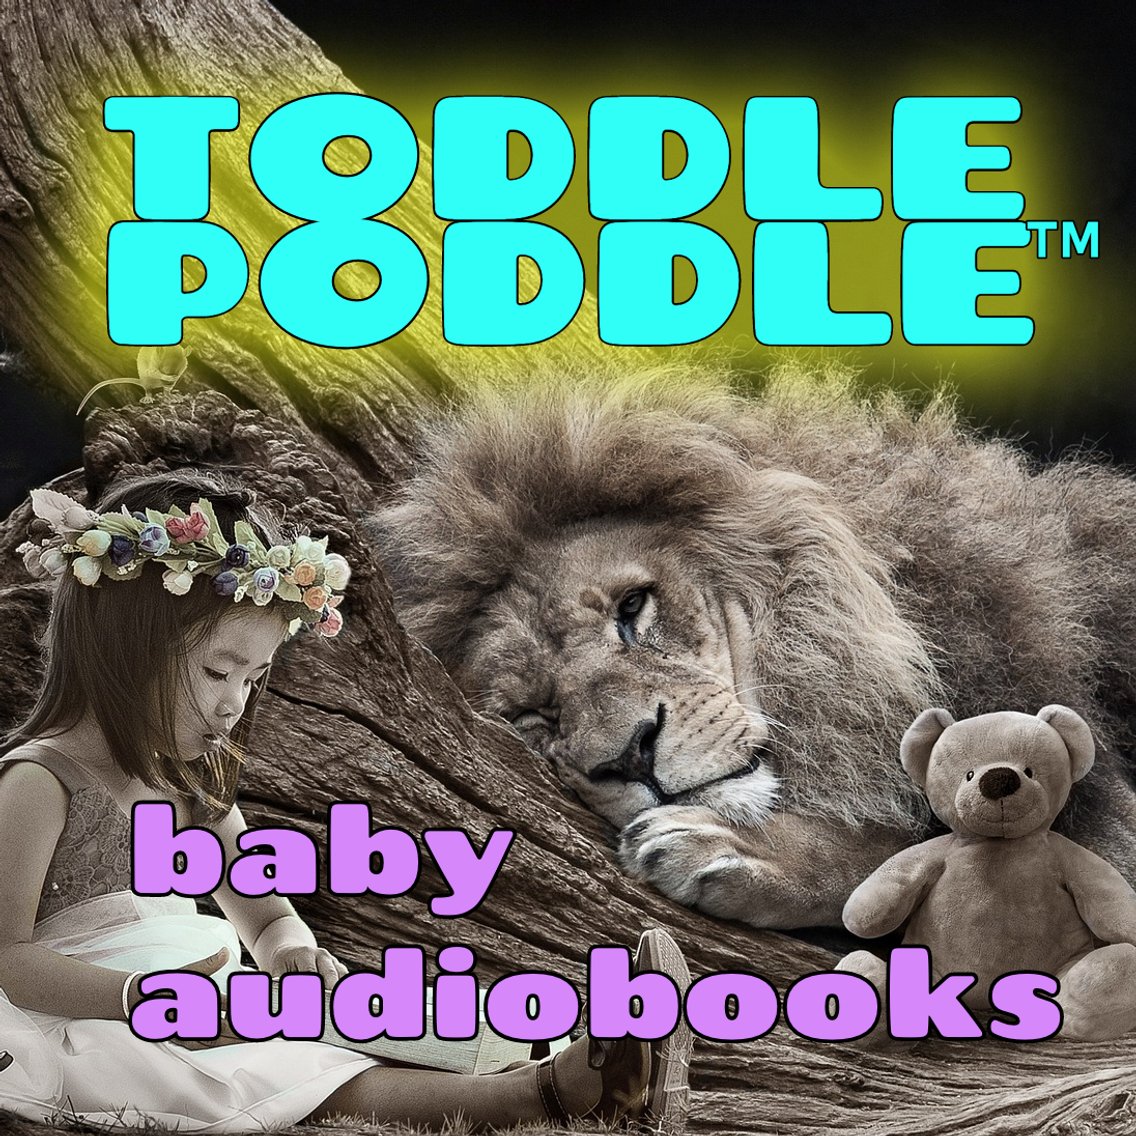 Toddle Poddle™ - Cover Image